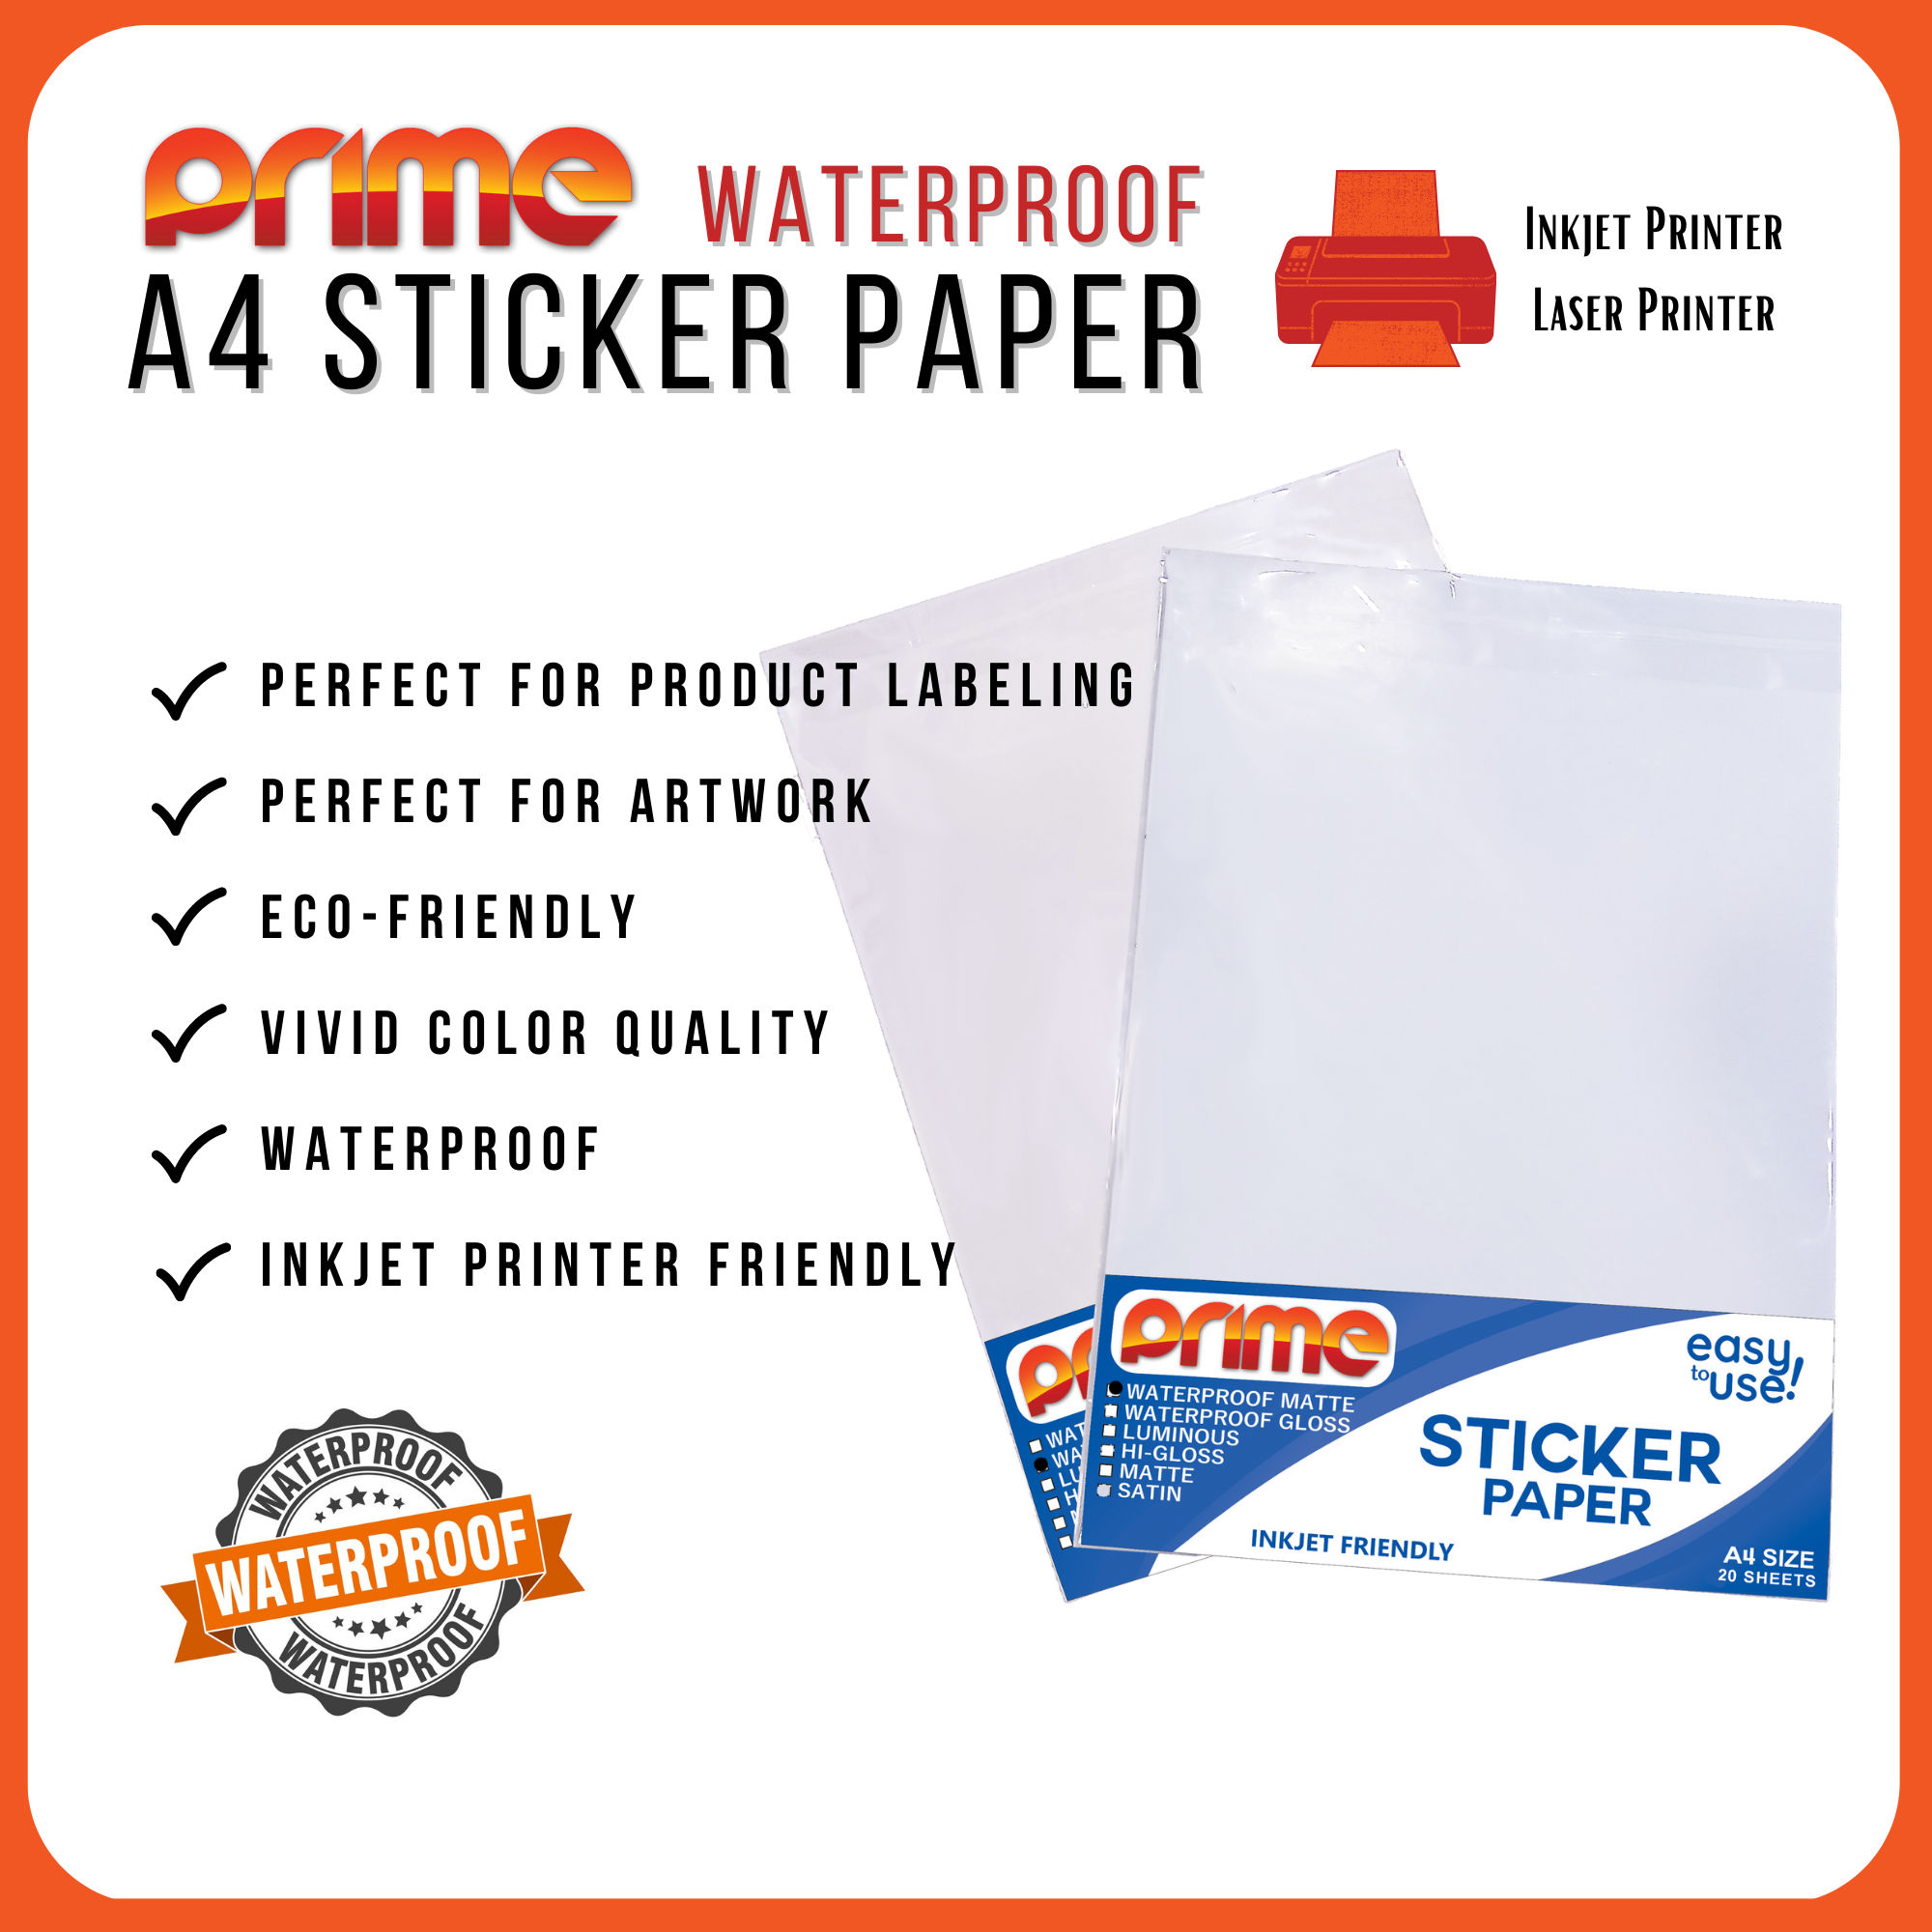 Prime Waterproof Printable A4 Sticker [10-20 sheets]